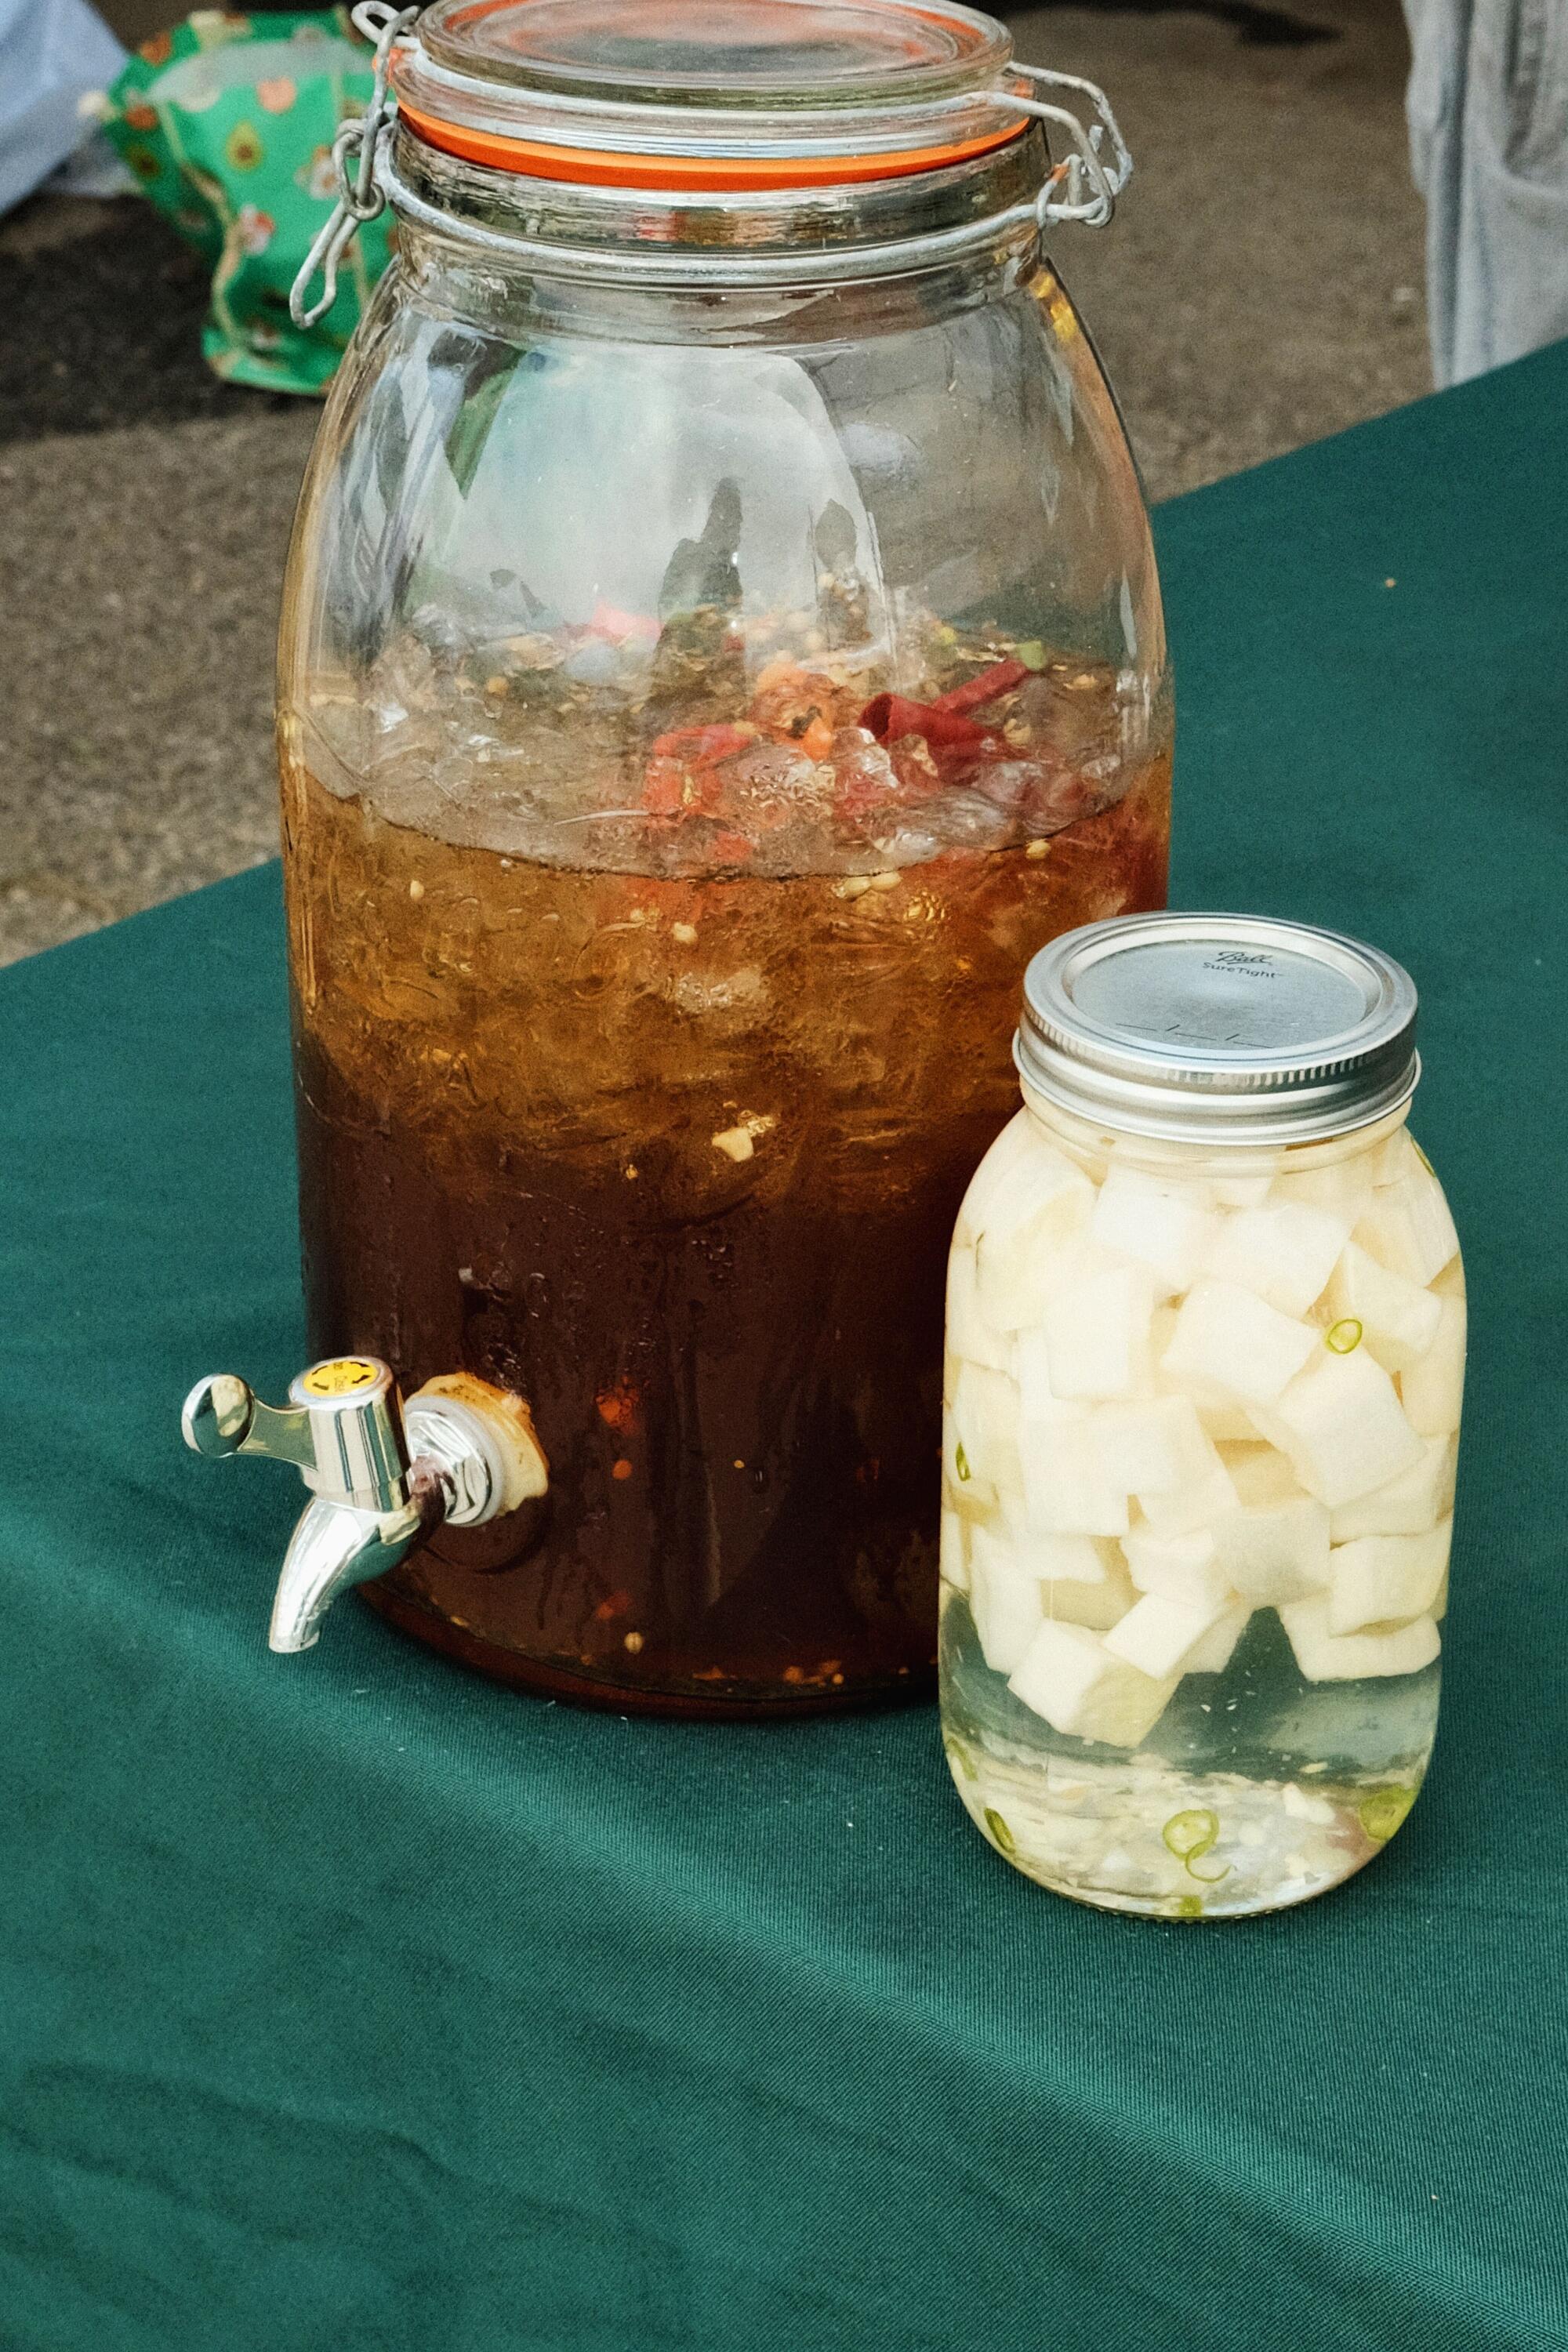 A jar of pickled white radish and a large container of iced brown pickling brine on a green tablecloth